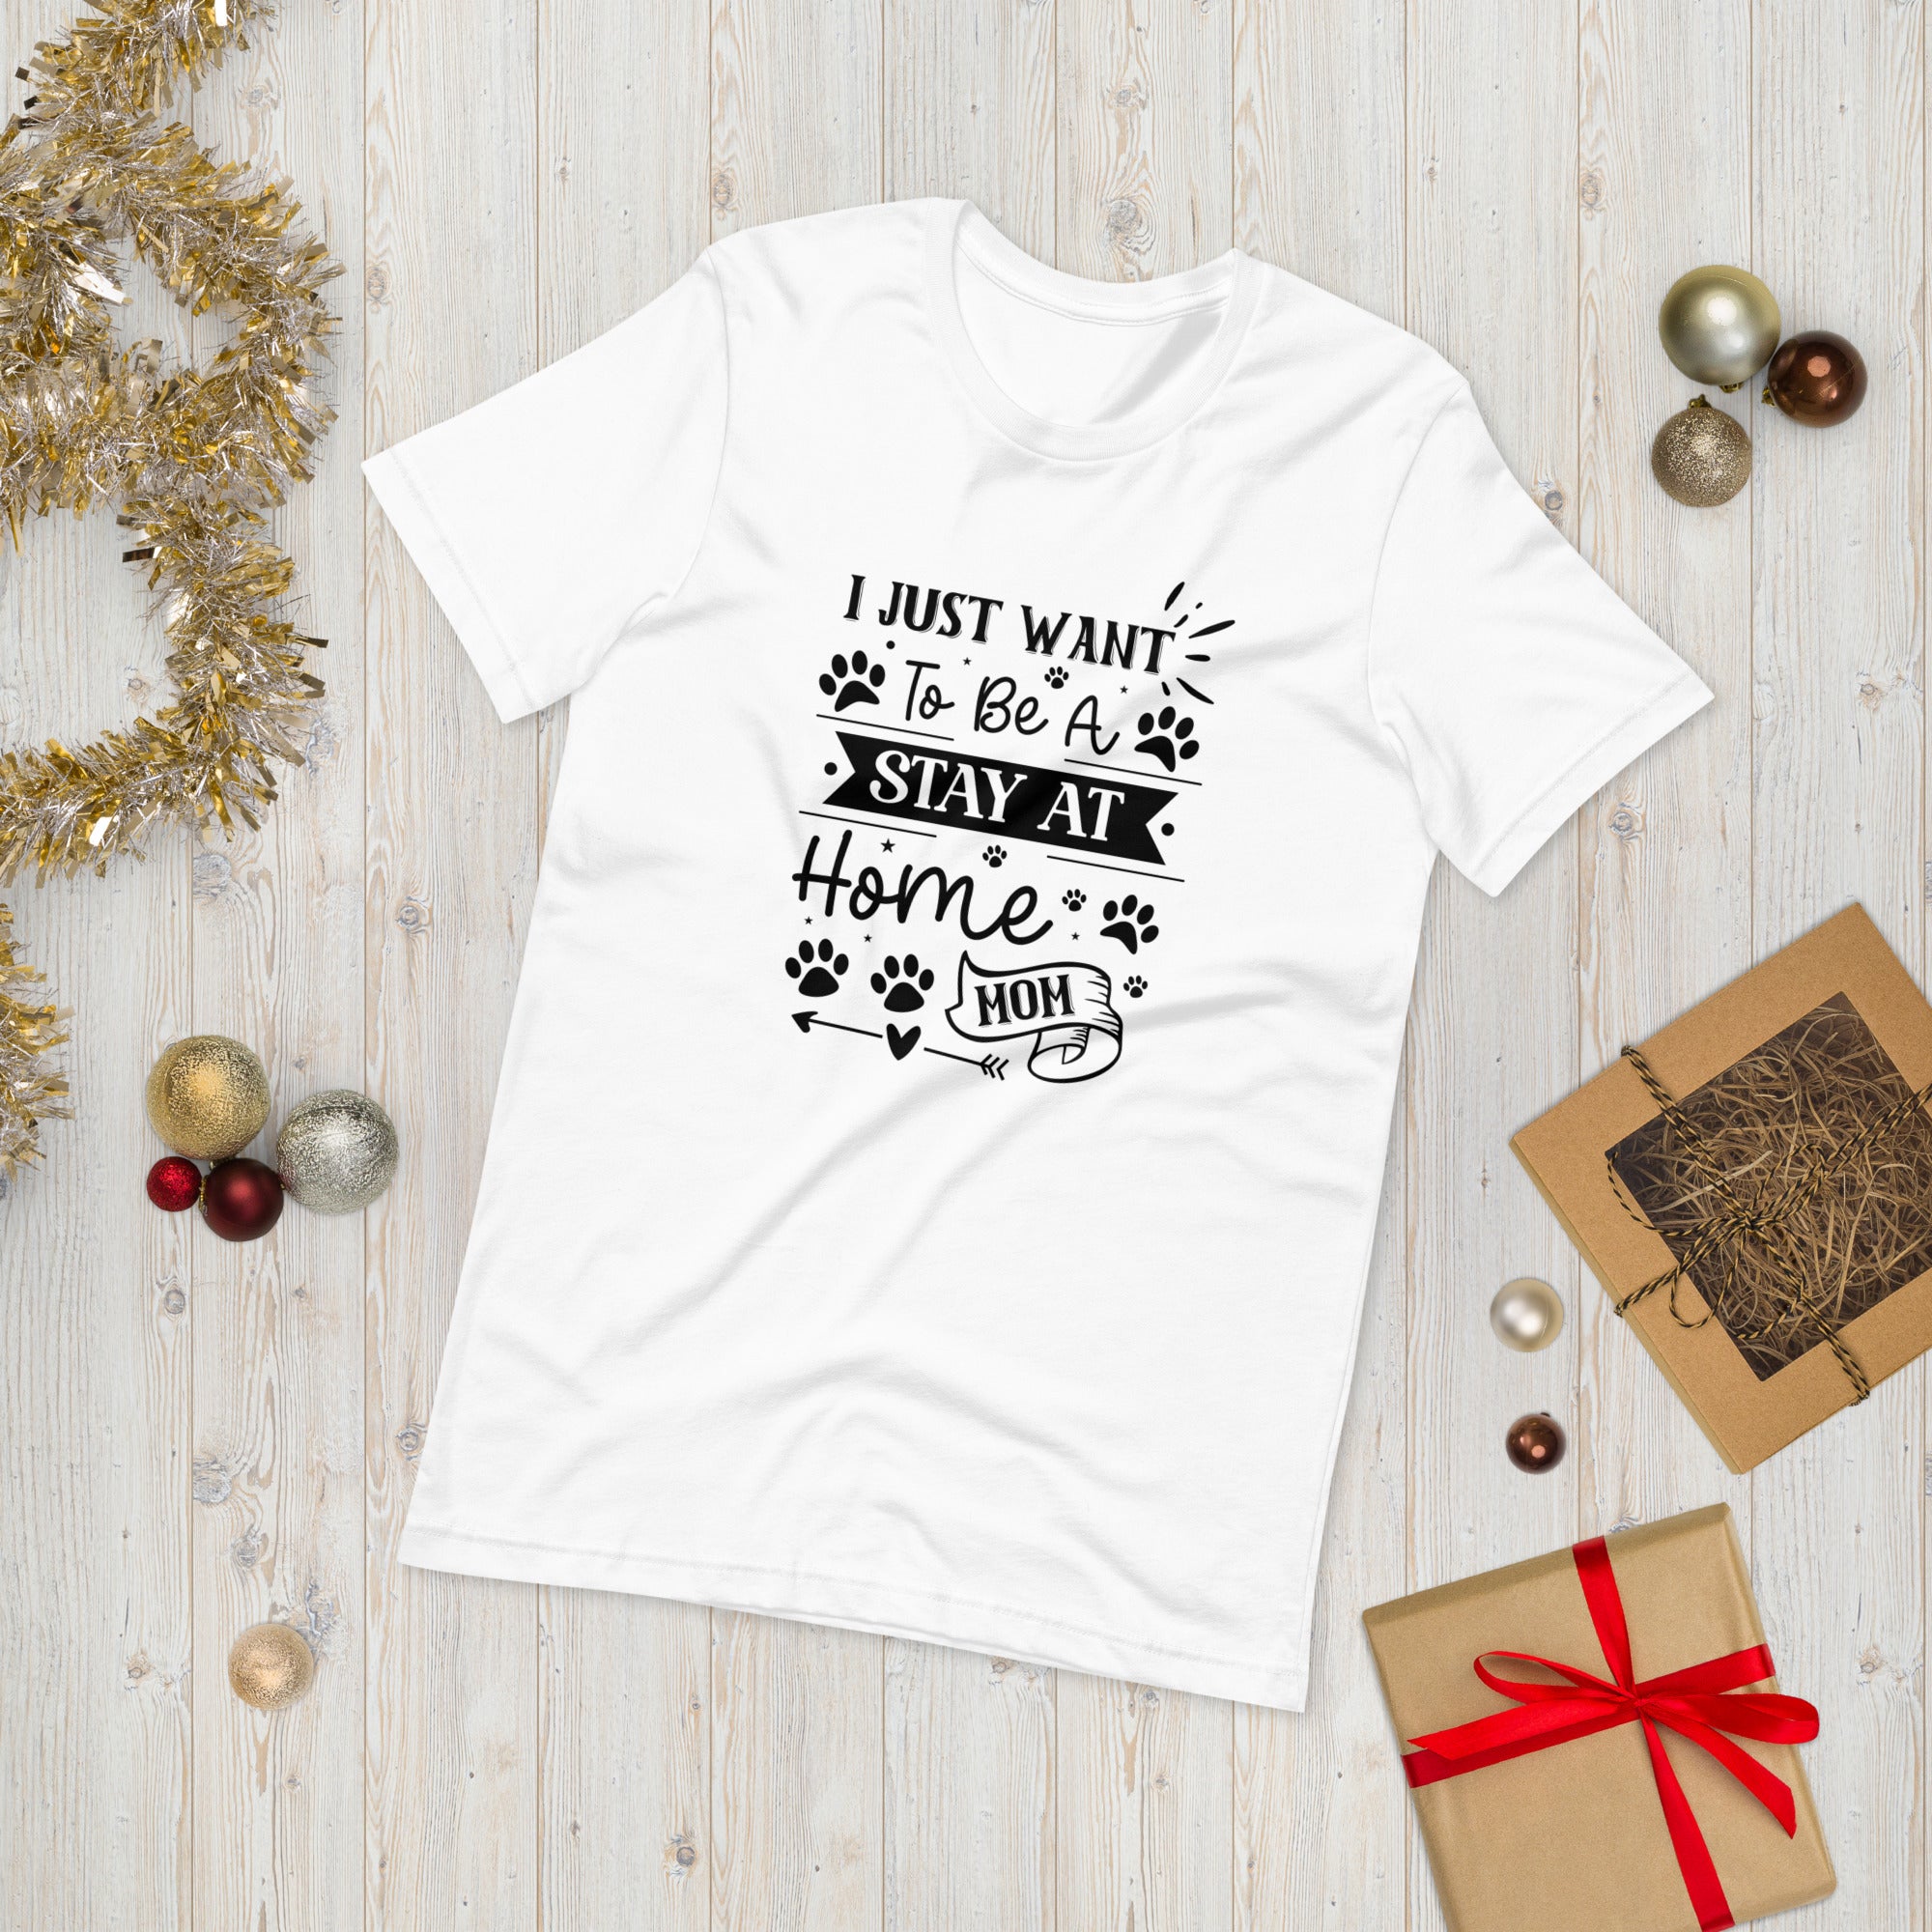 Unisex t-shirt- I Just Want To Be A Stay At Home Dog Mom